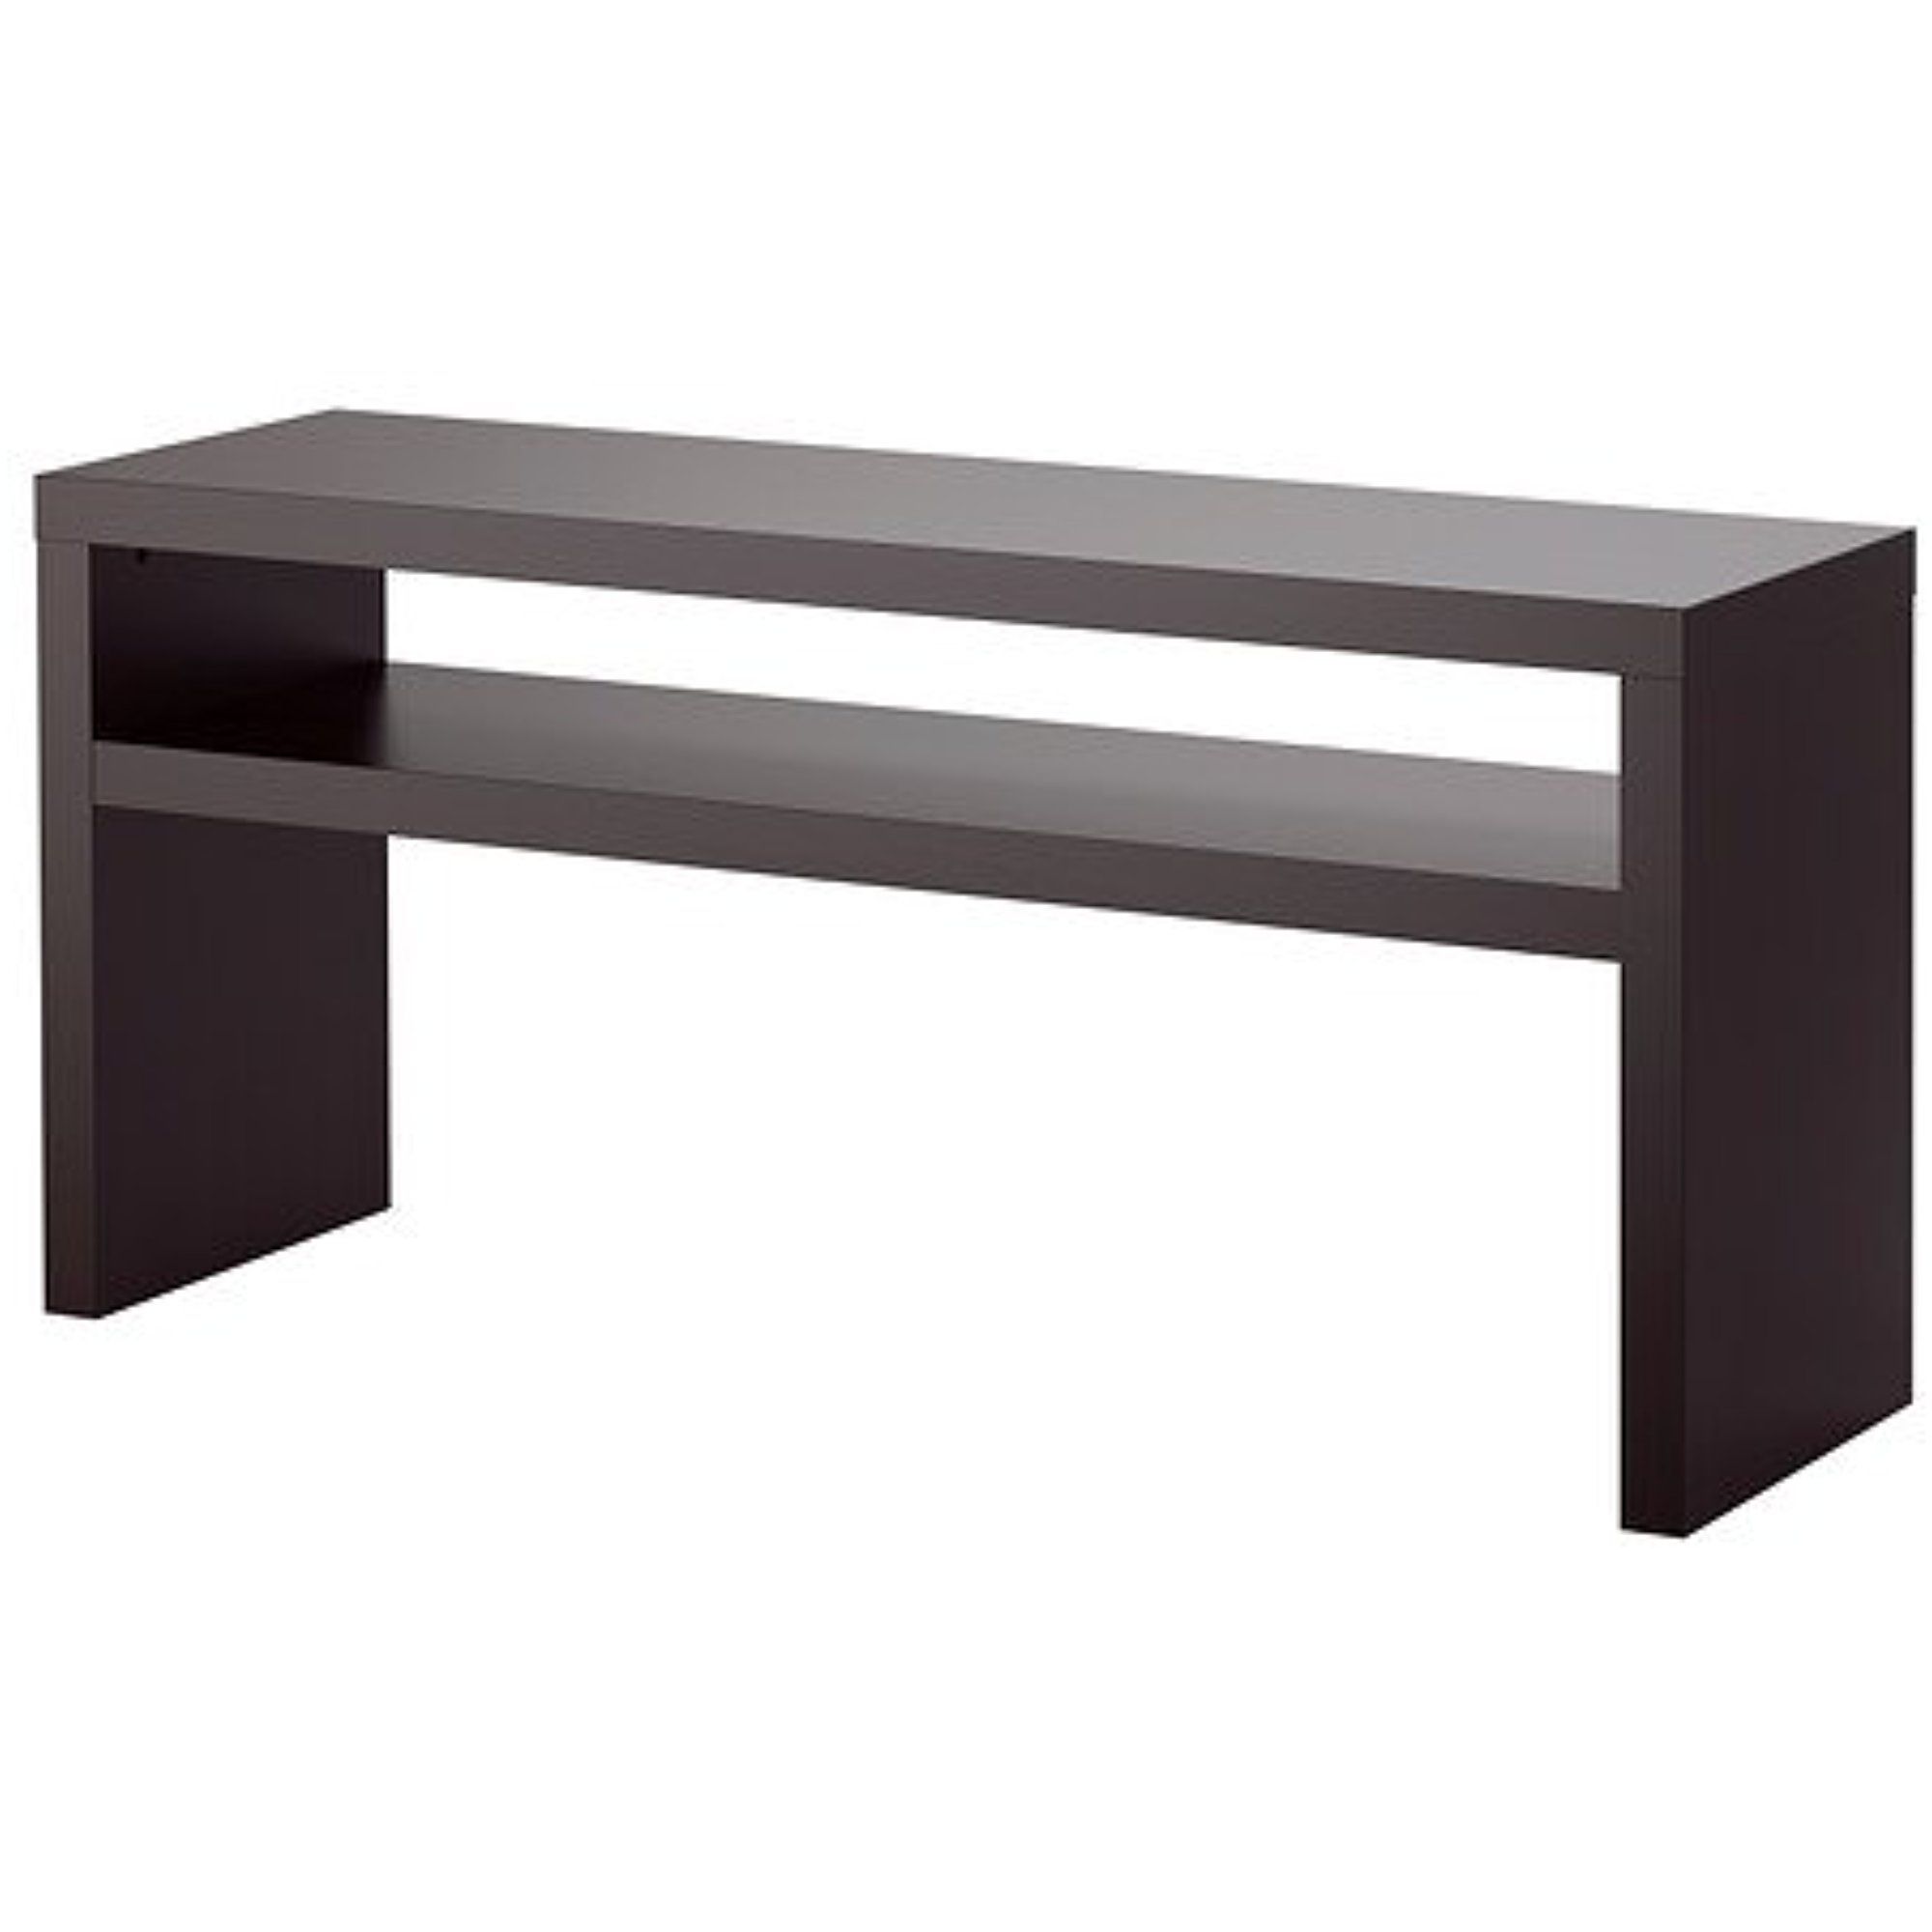 Ikea Console Table, Black Brown 55 1/8x15 3/8 ",  (View 7 of 20)